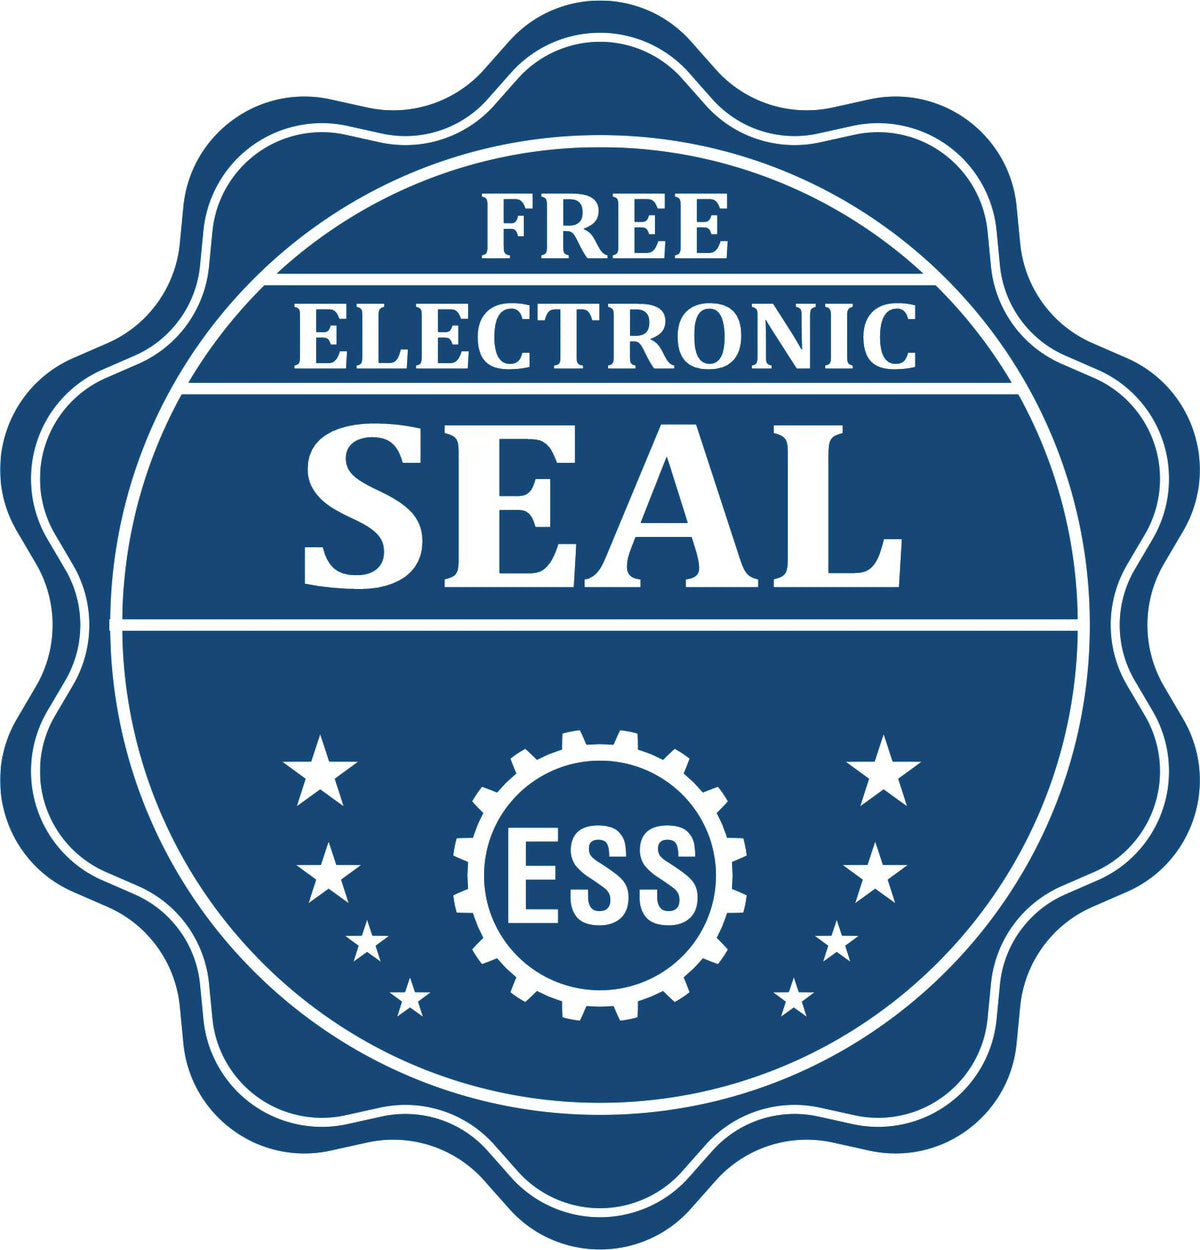 A badge showing a free electronic seal for the Slim Pre-Inked Nebraska Professional Engineer Seal Stamp with stars and the ESS gear on the emblem.